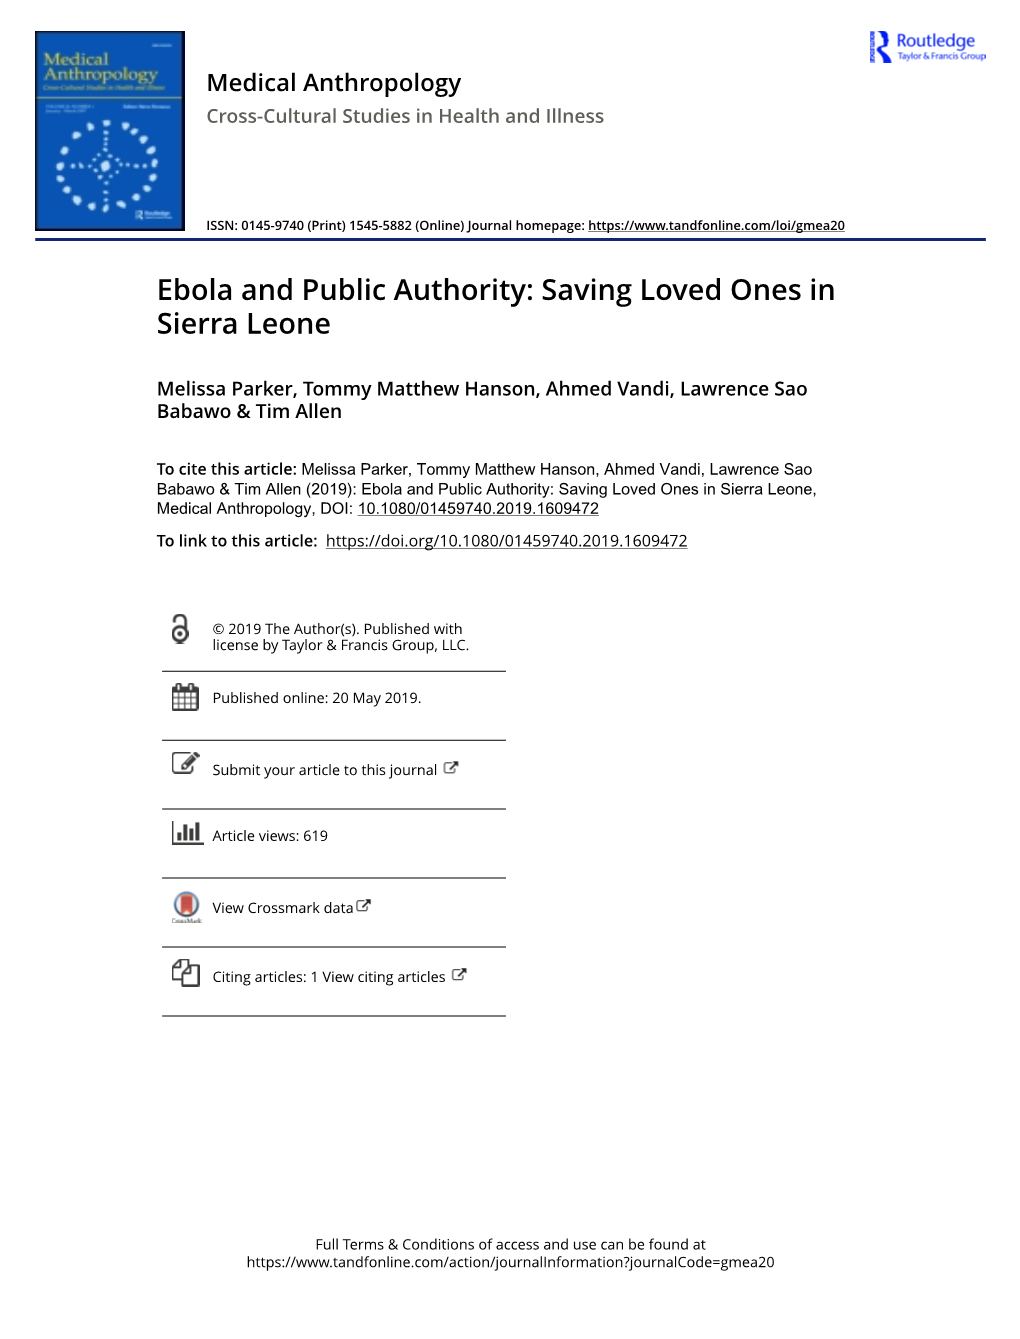 Ebola and Public Authority Saving Loved Ones in Sierra Leone.Pdf